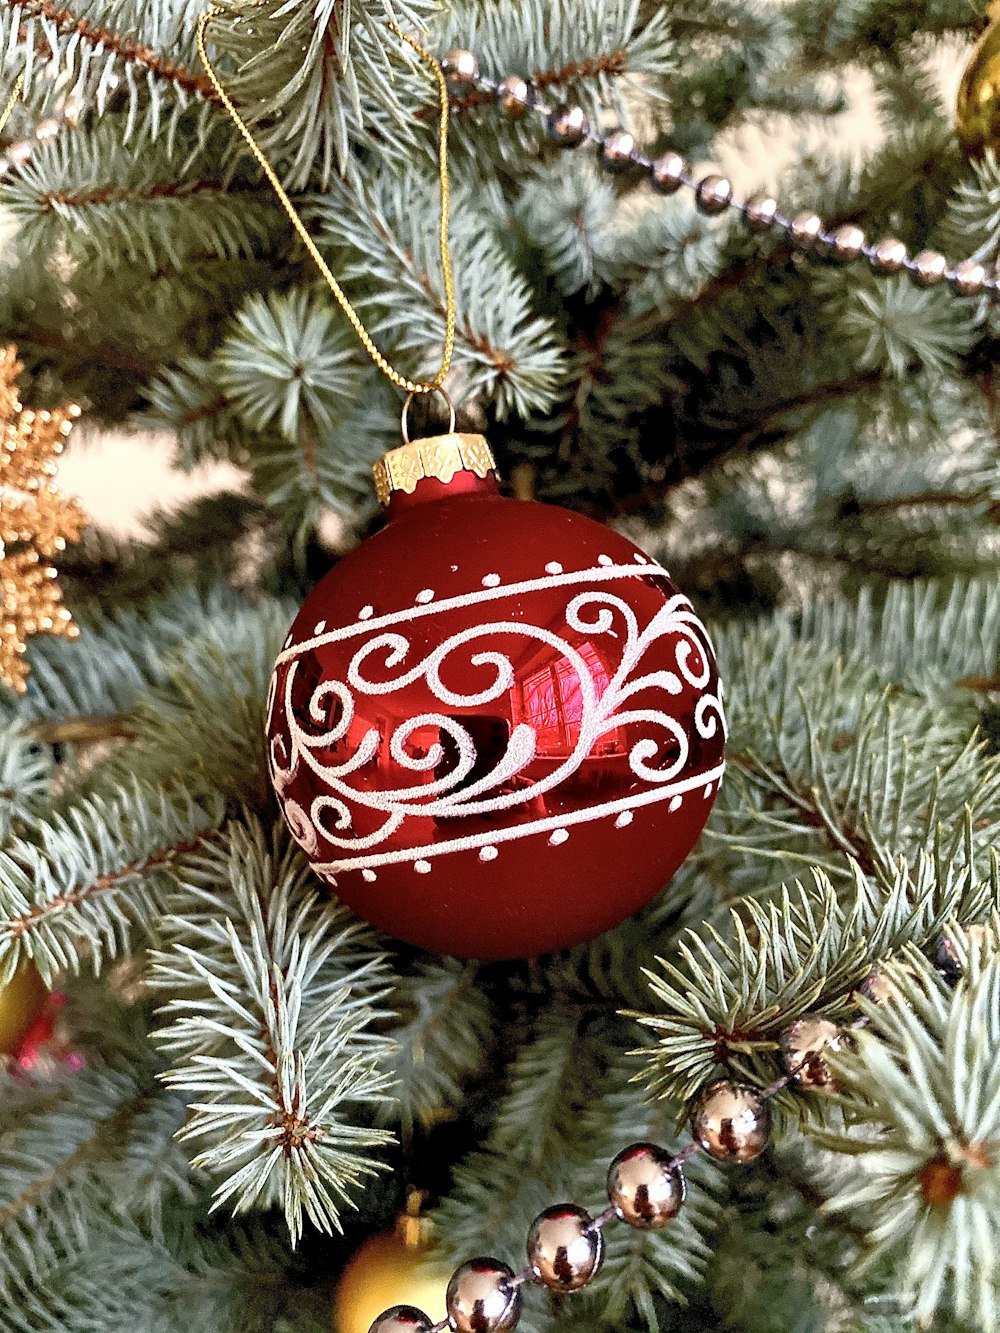 Red and white christmas bauble photo – Free Christmas Image on ...